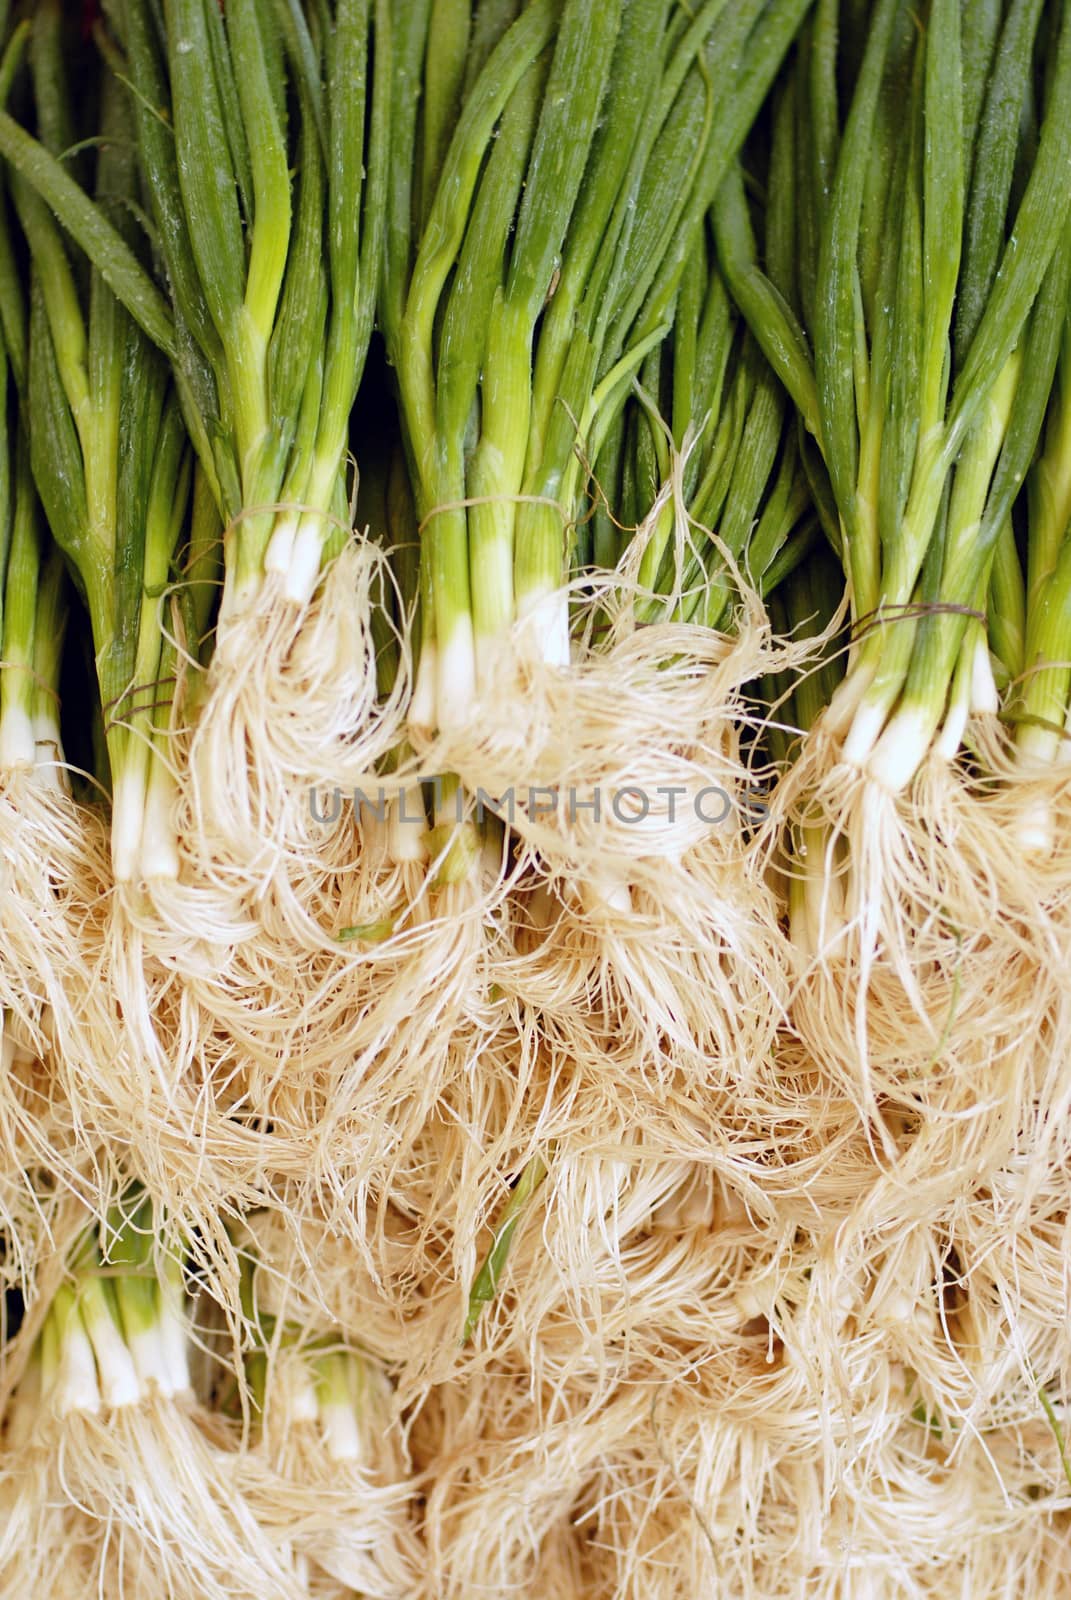 Bundle of spring onions with elastic on them ready for sale at the market.